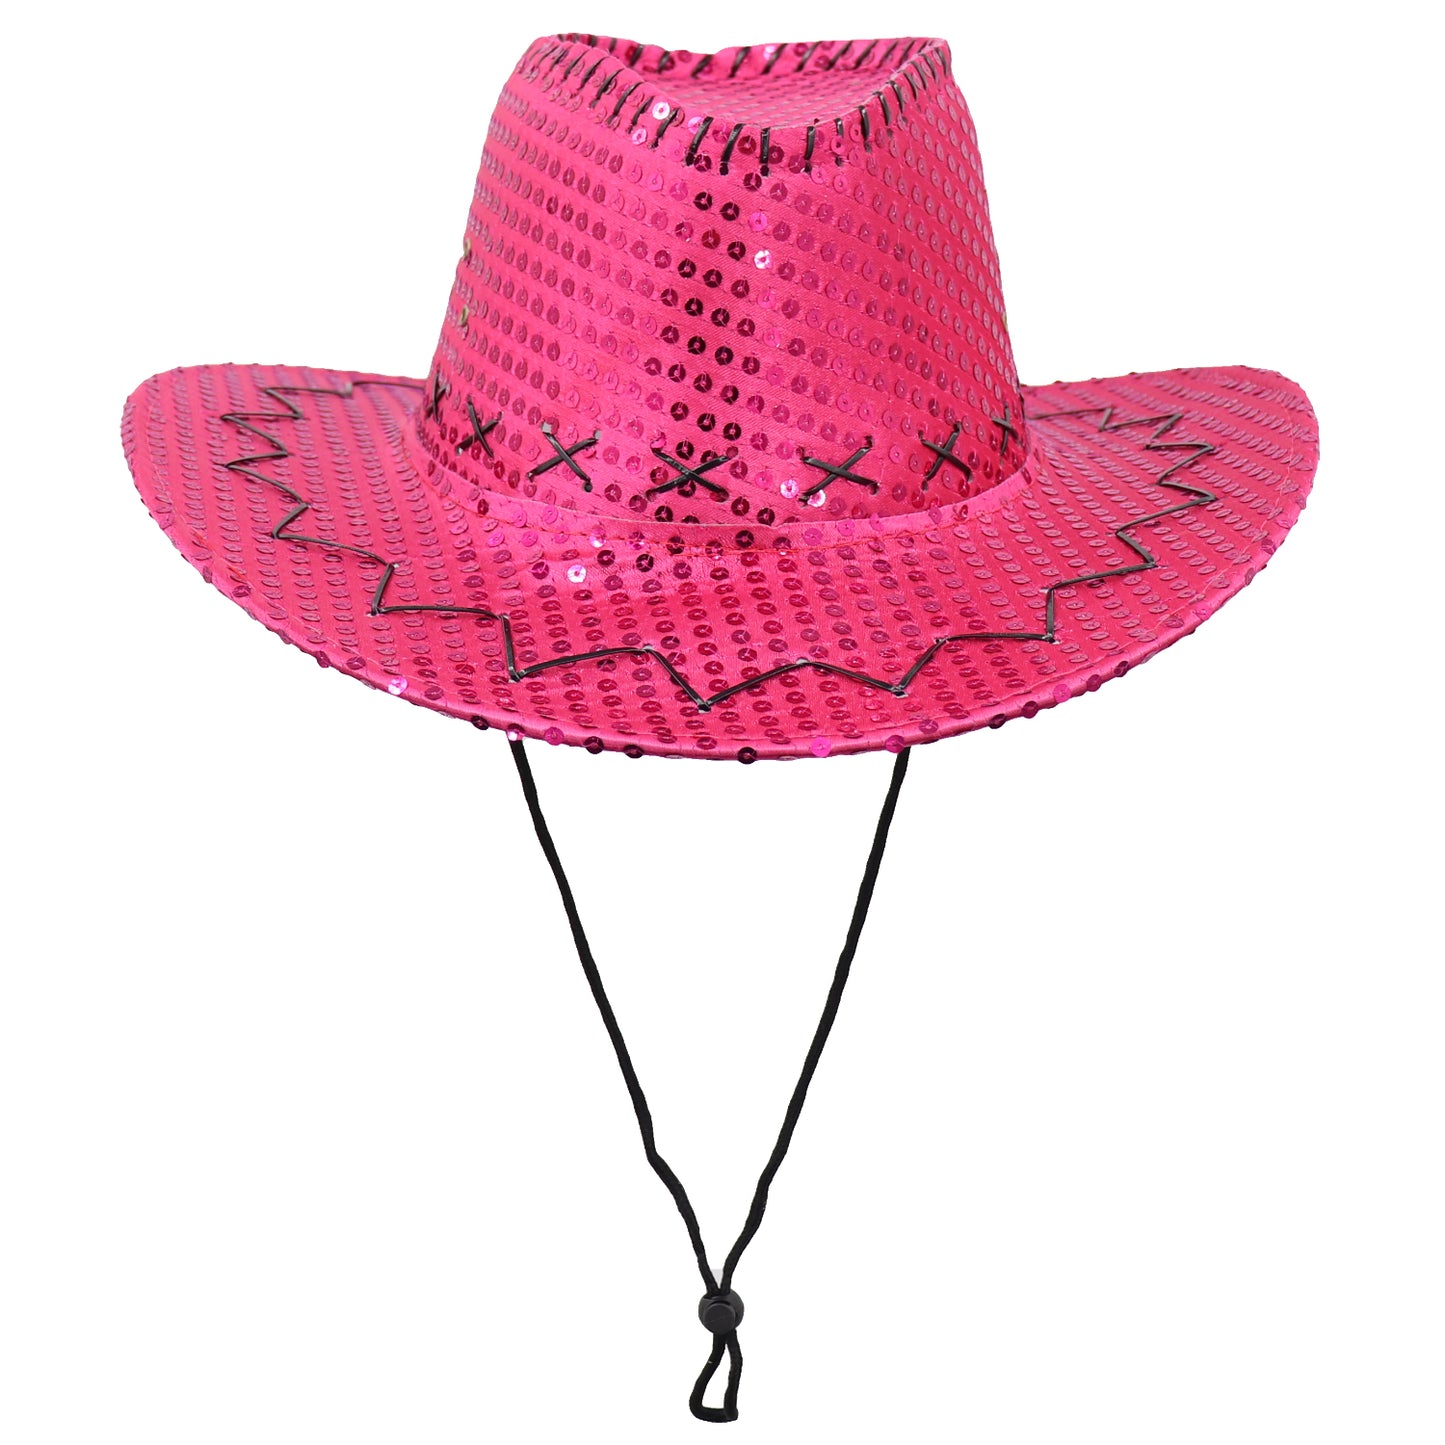 Sequin Cowboy Hat Glitter Cap Western Trilby Shiny Cowgirl Dress Up Party Wear, Hot Pink